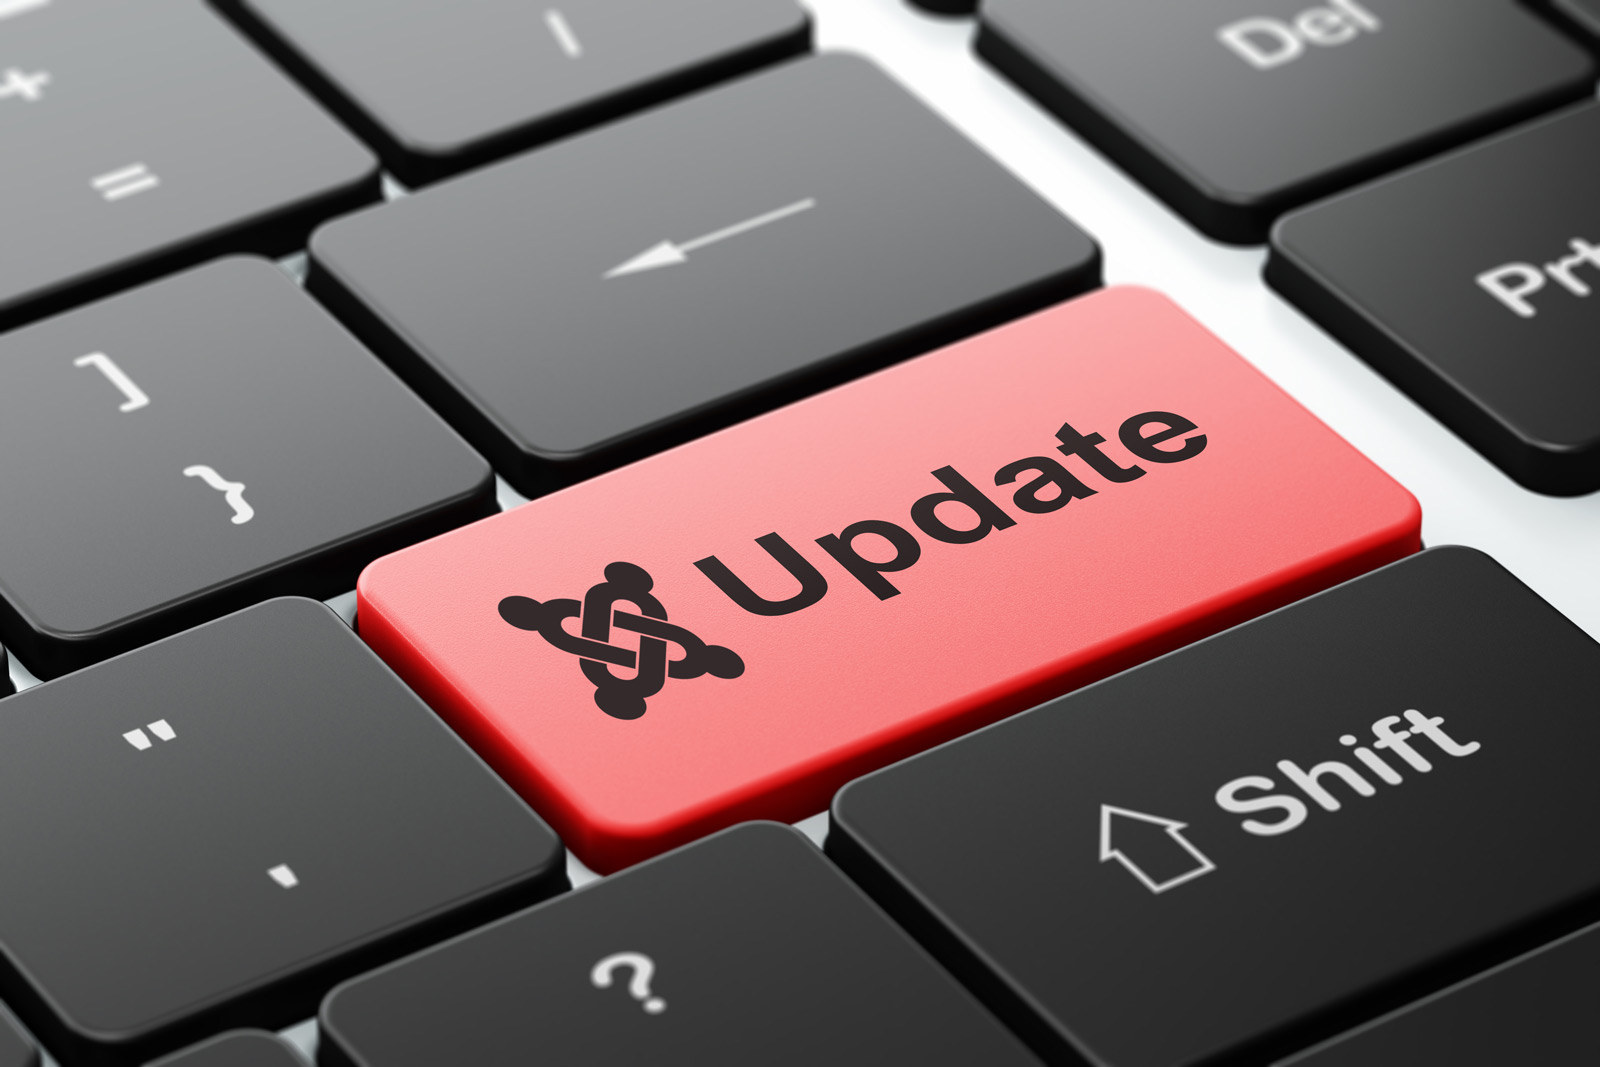 Updating To The Latest Version Of Joomla